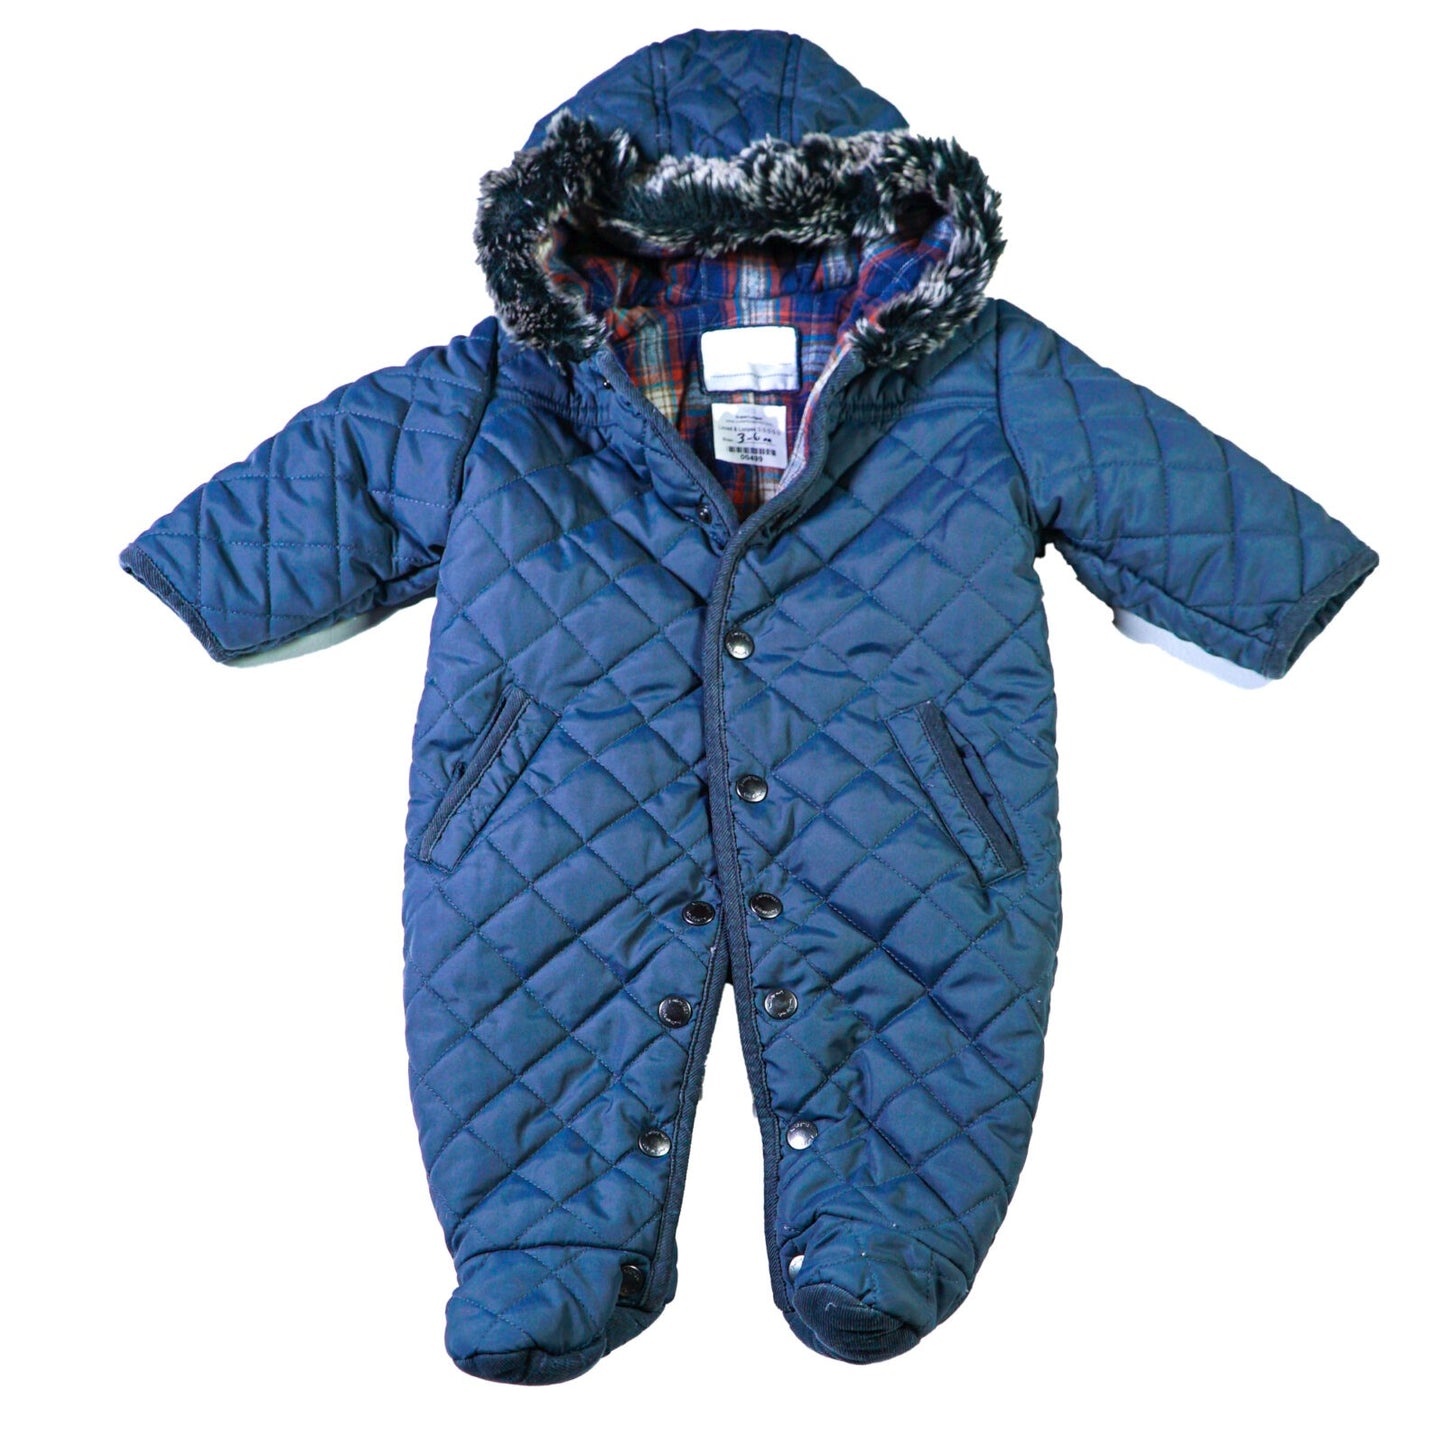 Cotton quilted pramsuit with fur lined hood